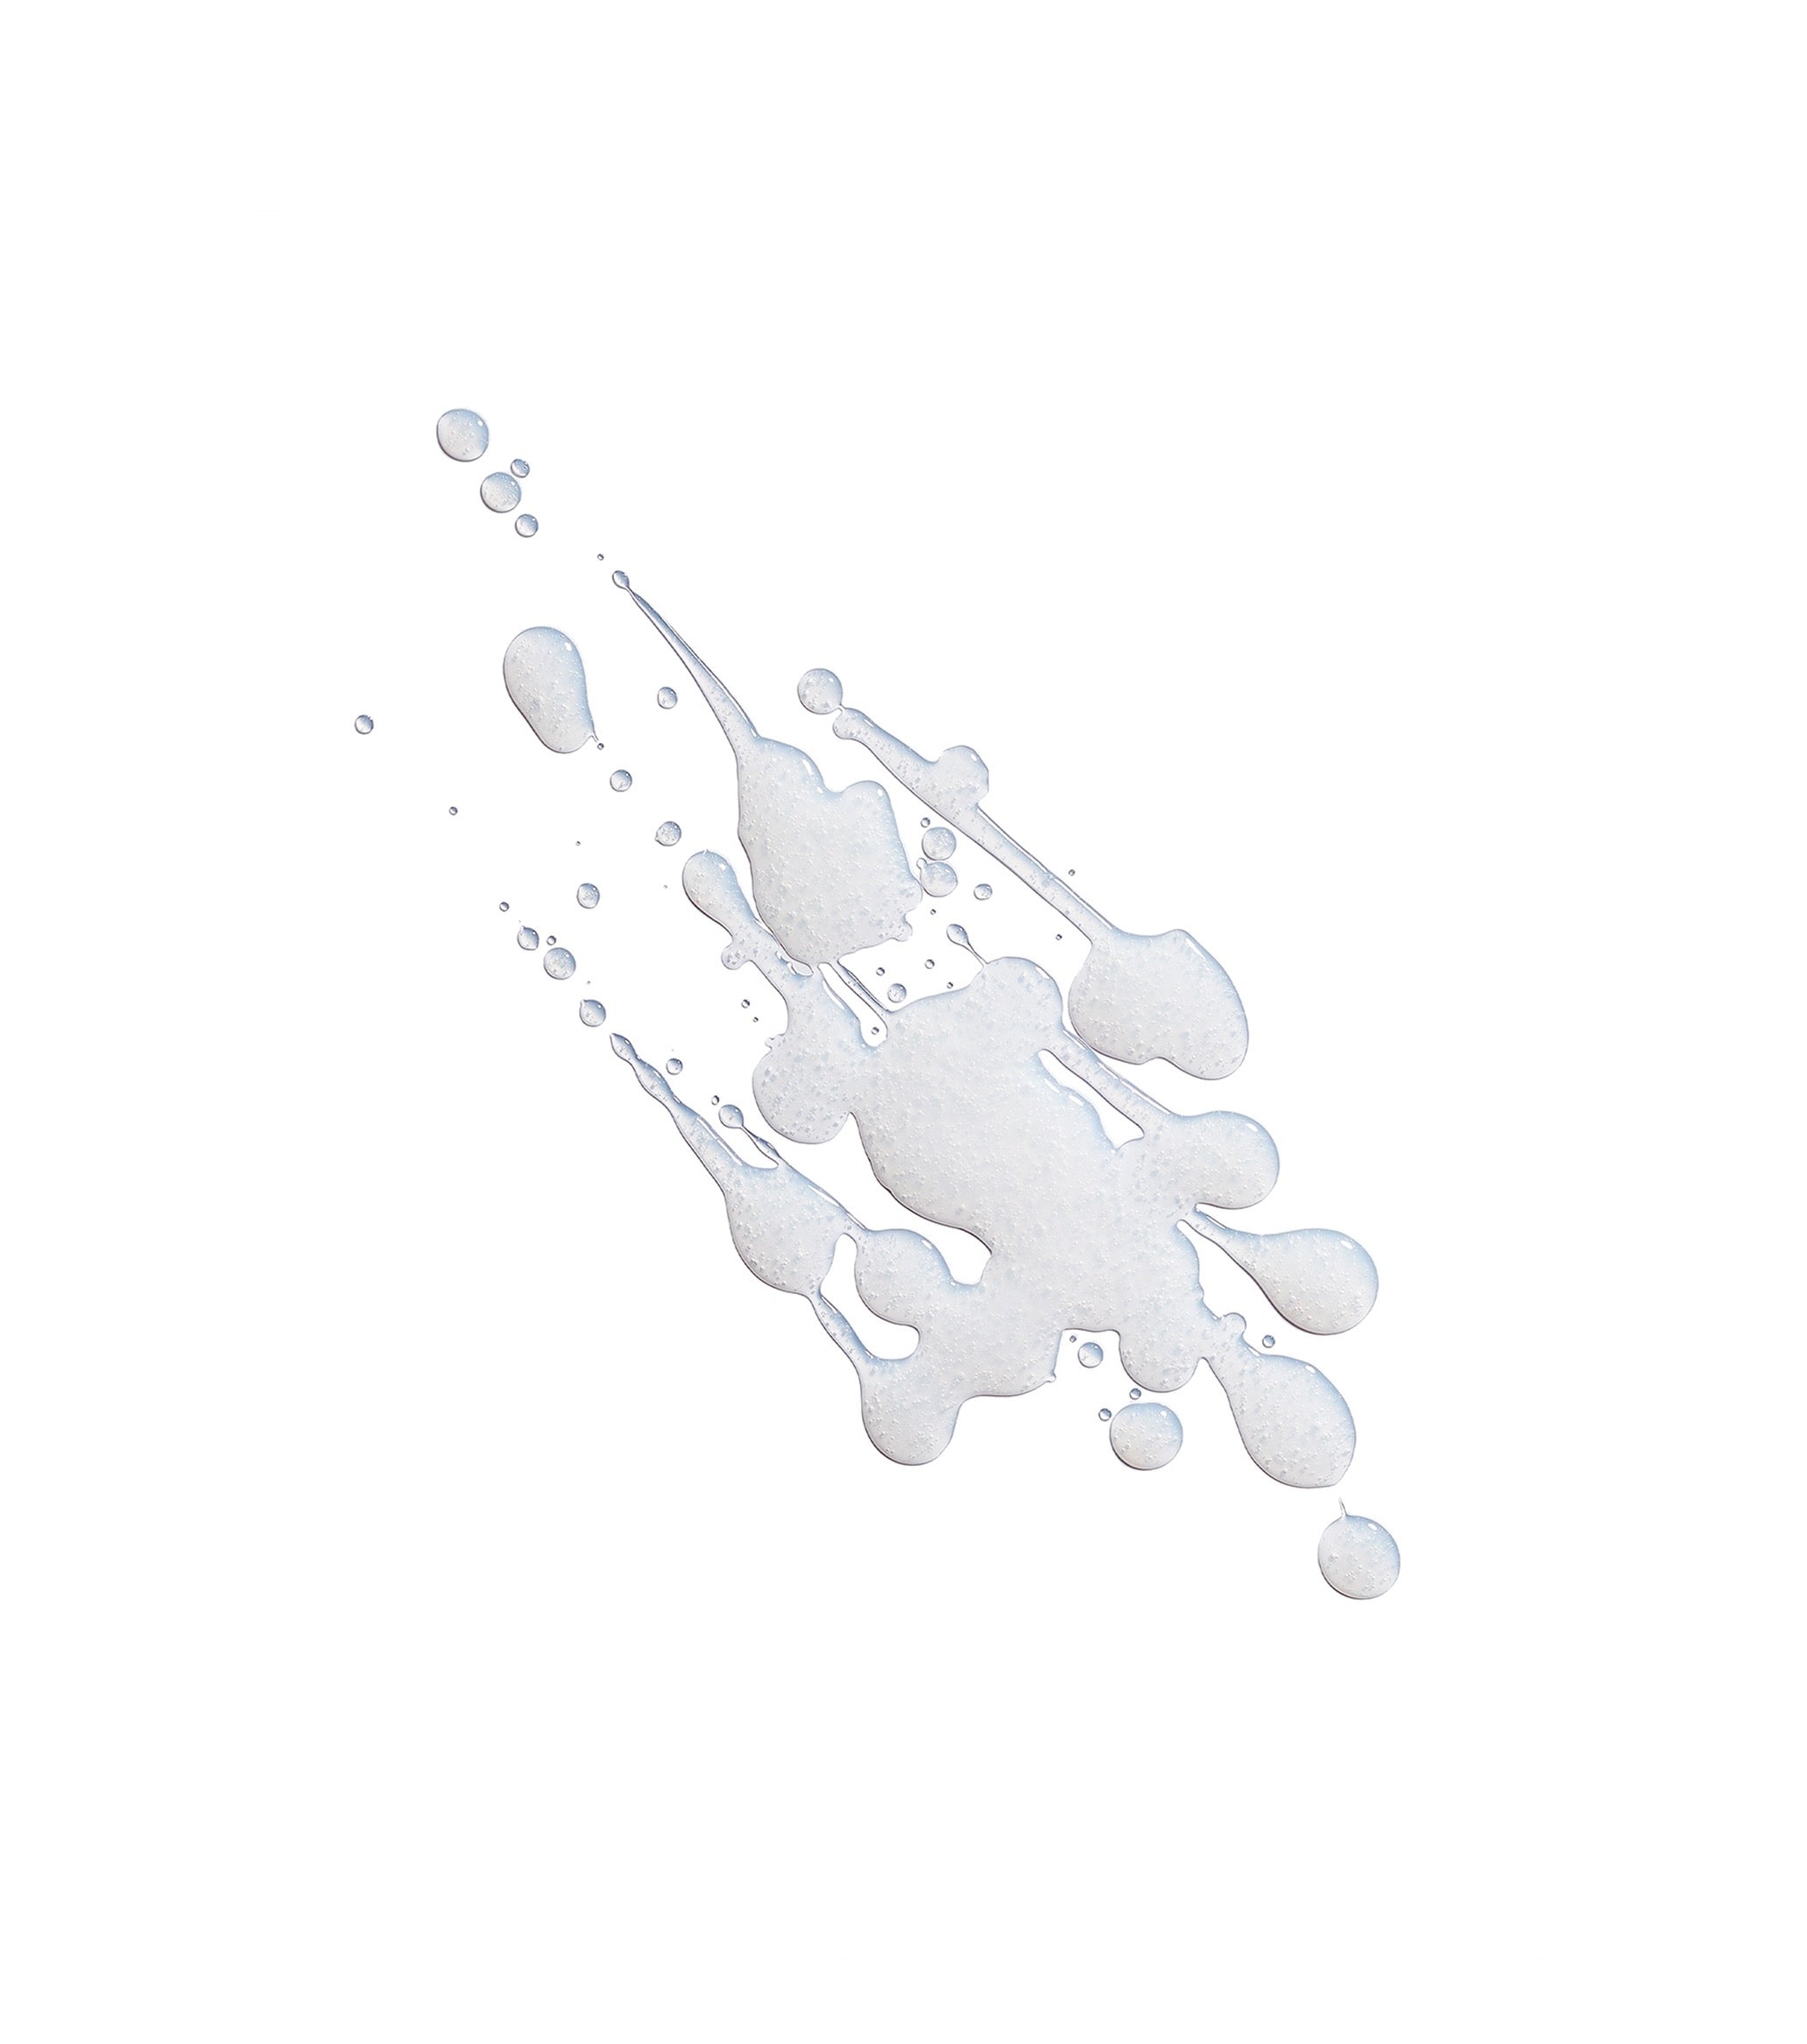 Image of a swipe of a creamed colored gel on a white background